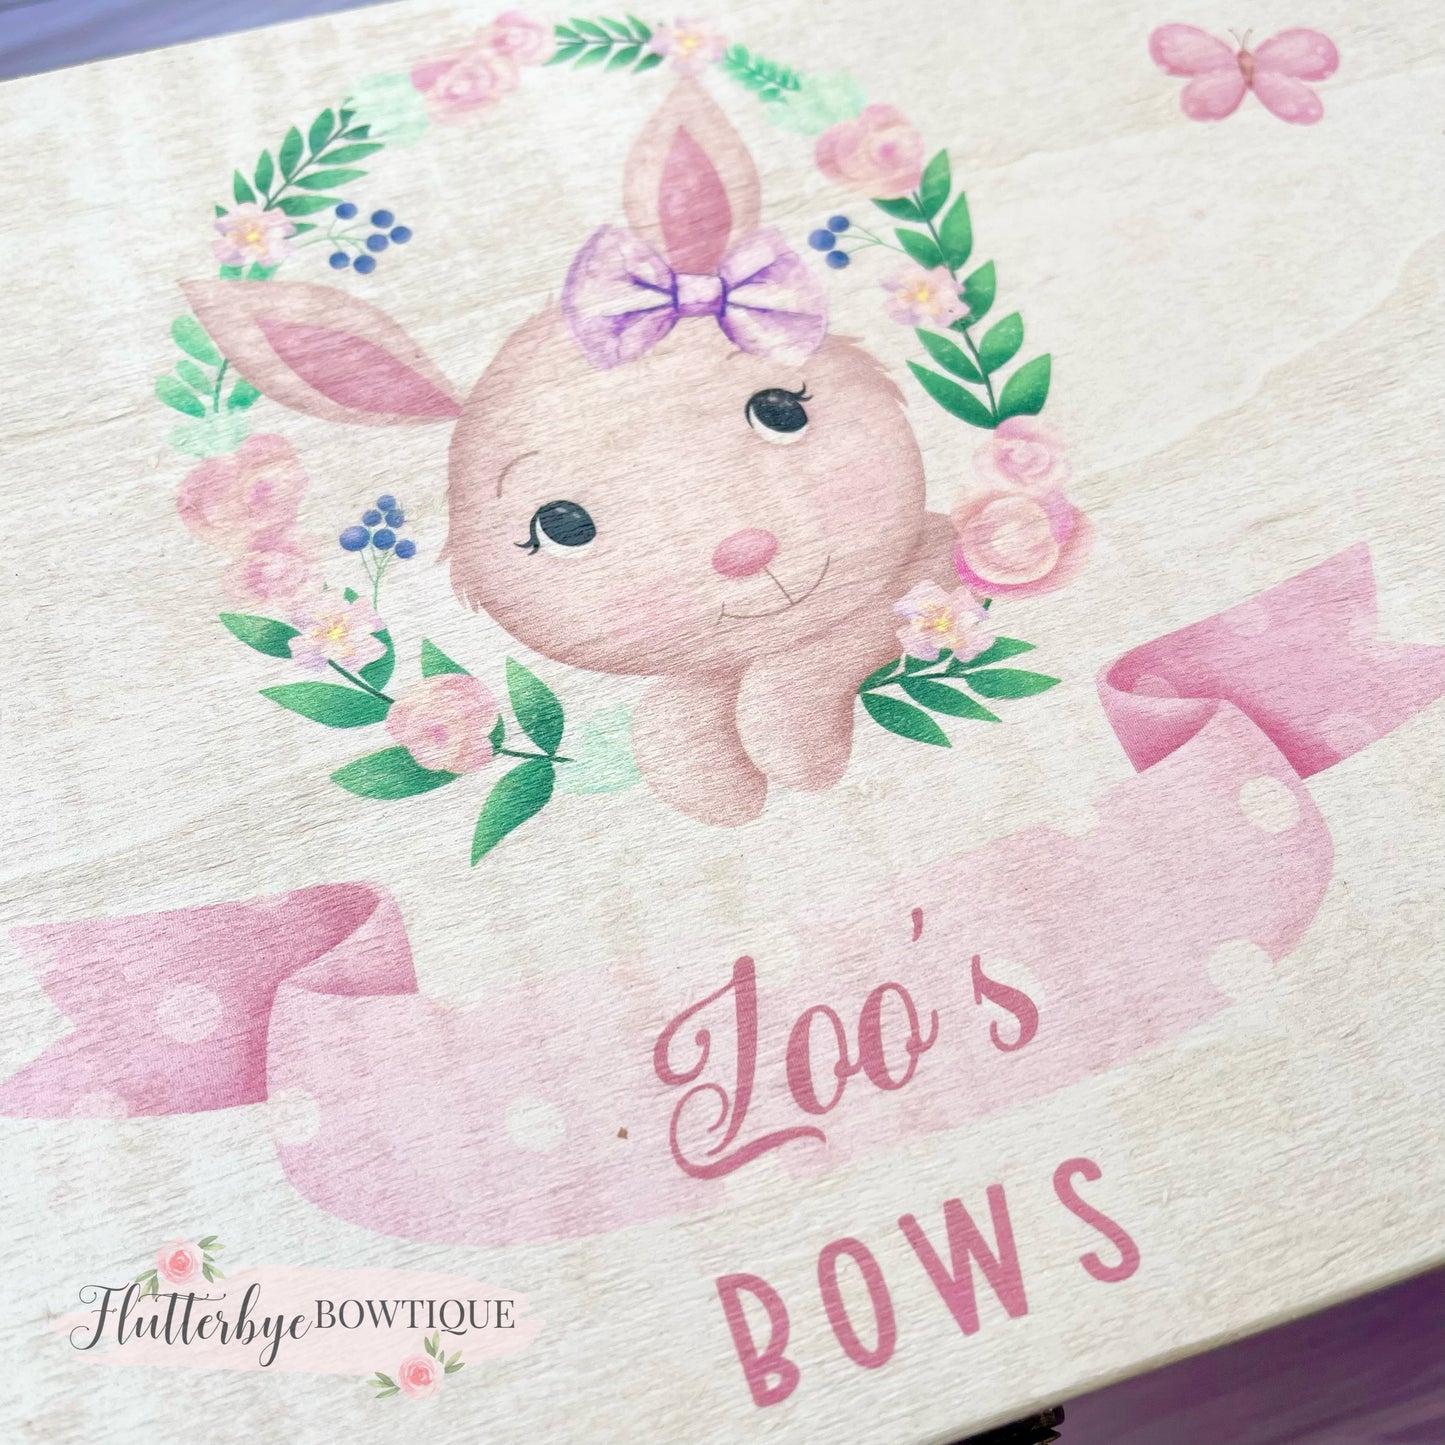 Bunny Bow Box, personalised wooden box